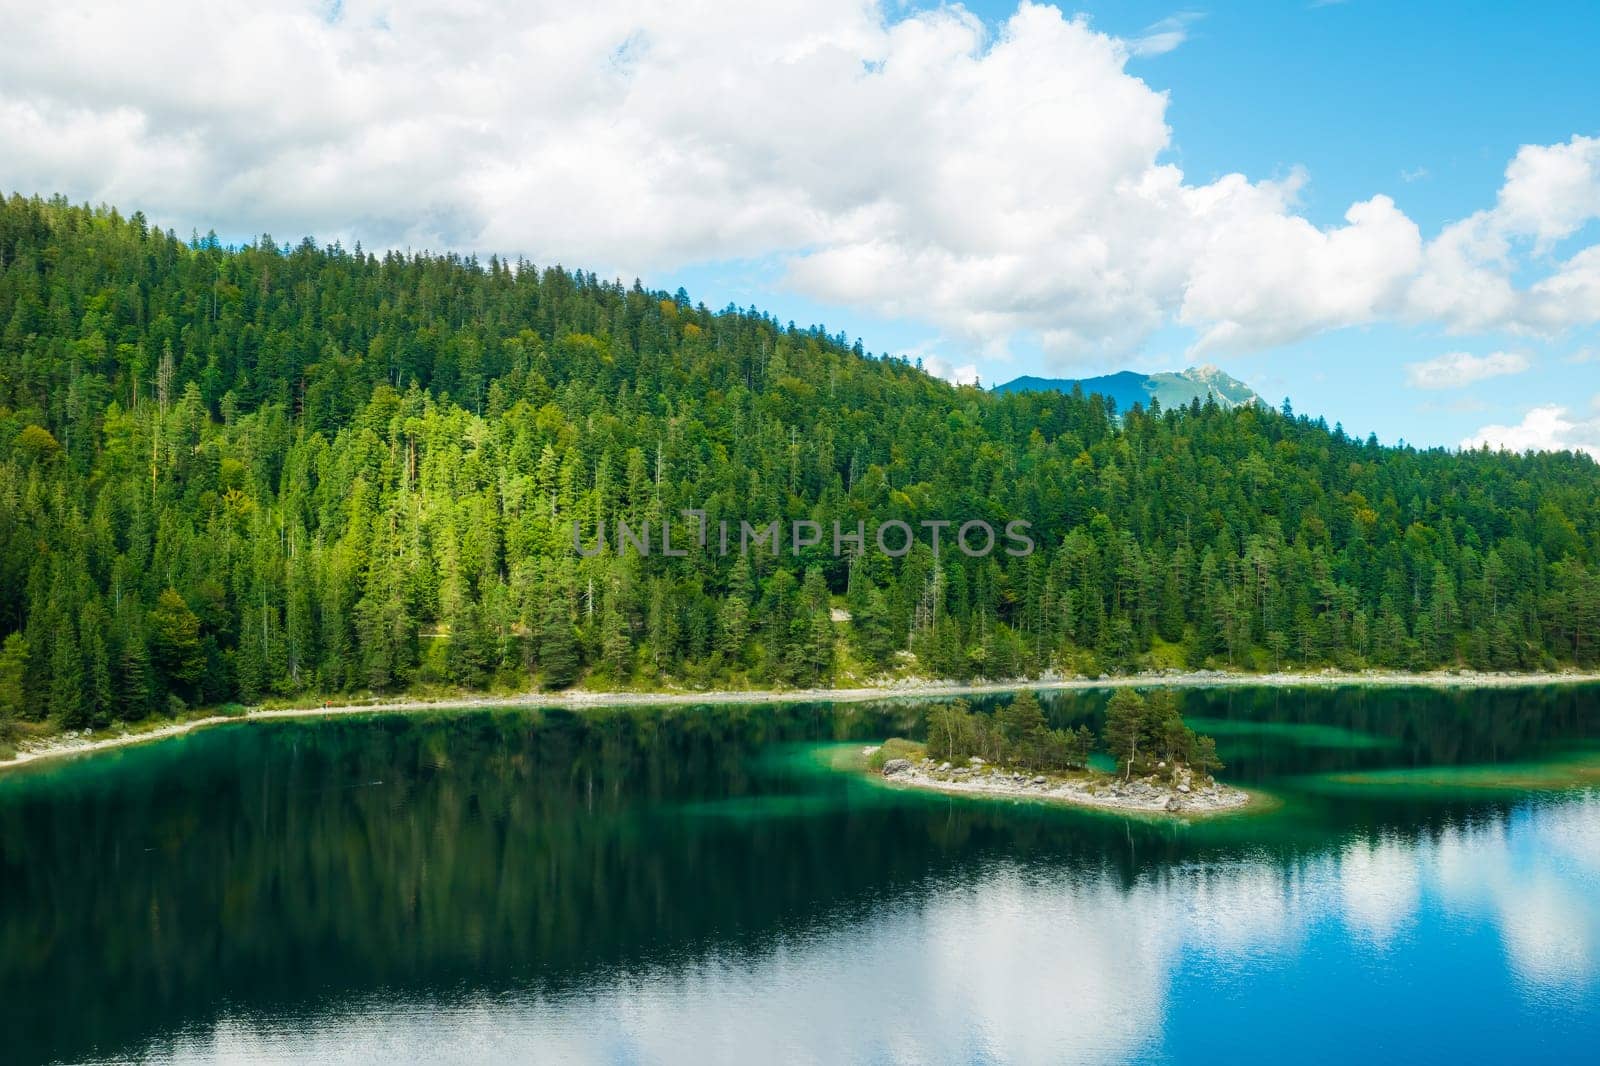 Mountains with spruce trees and clouds are reflected in a forest river. by vladimka